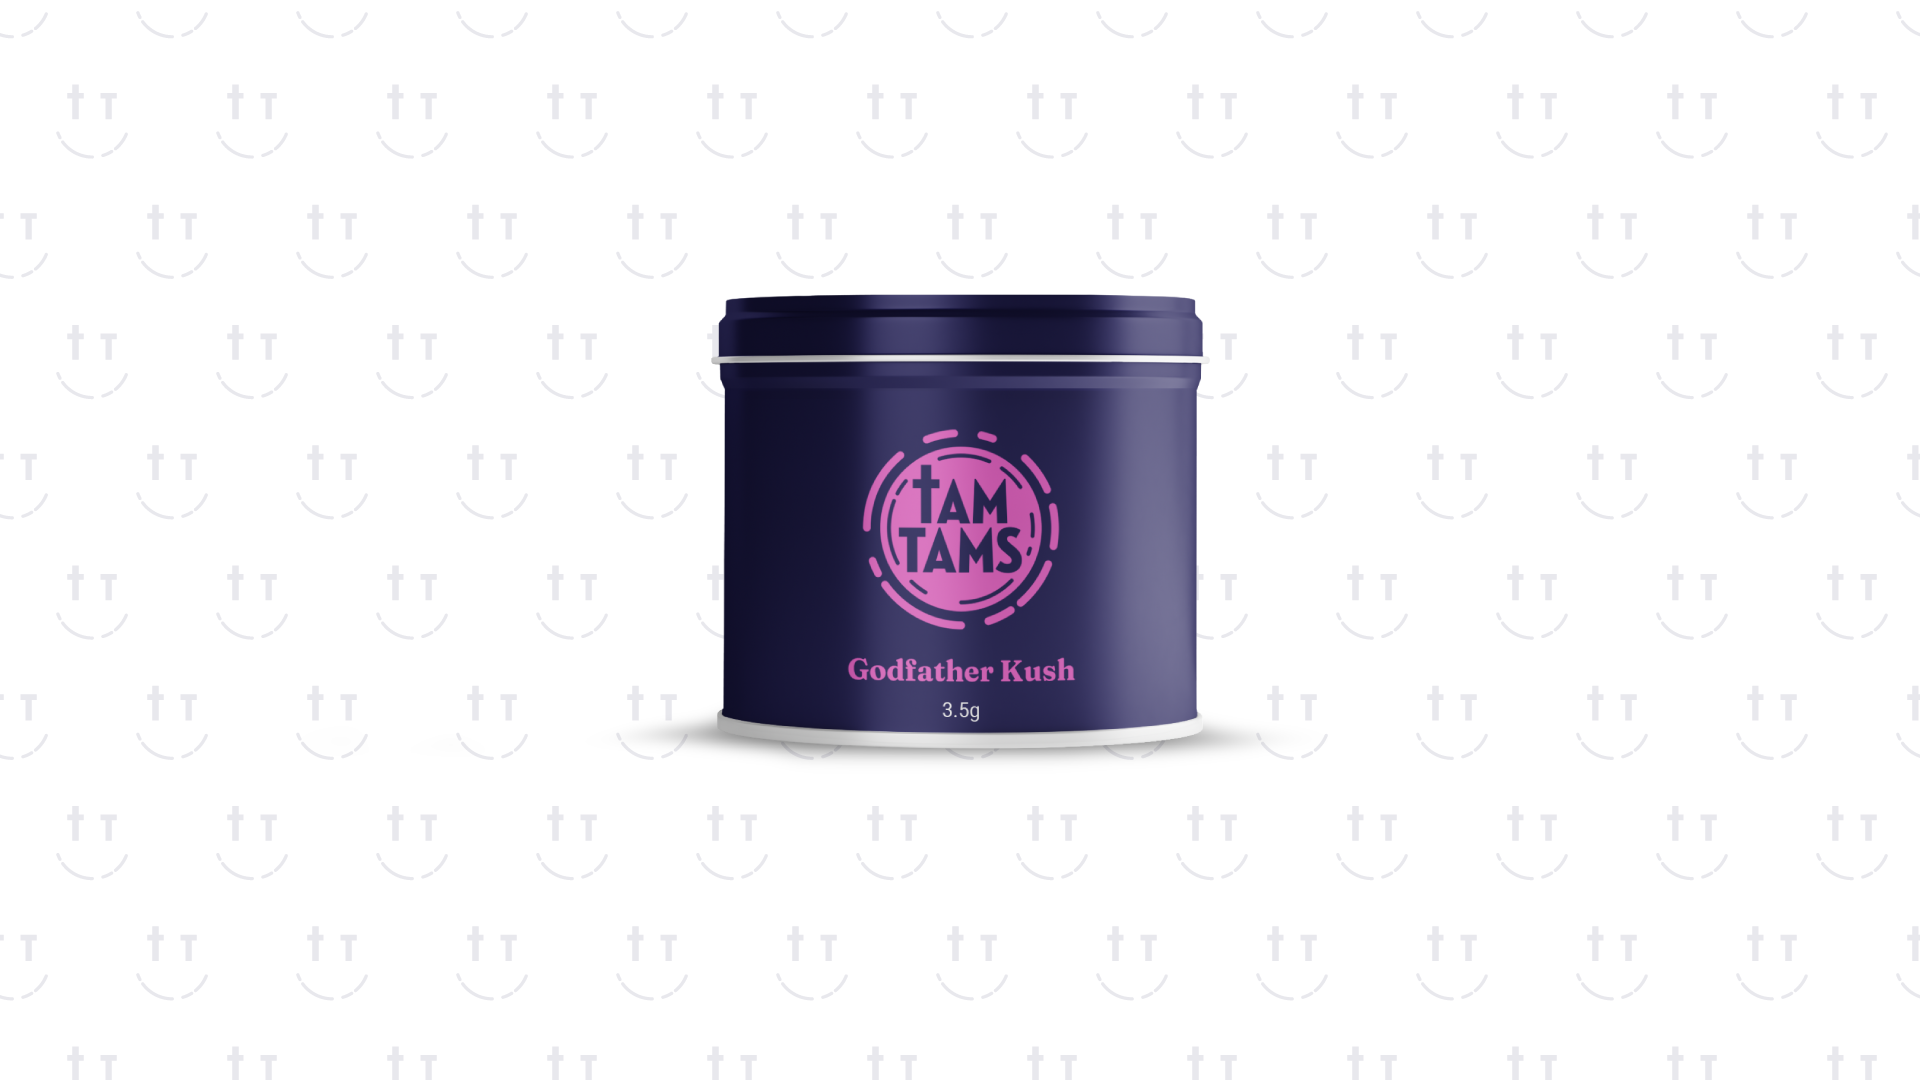 A beauty package of Tam Tams cannabis